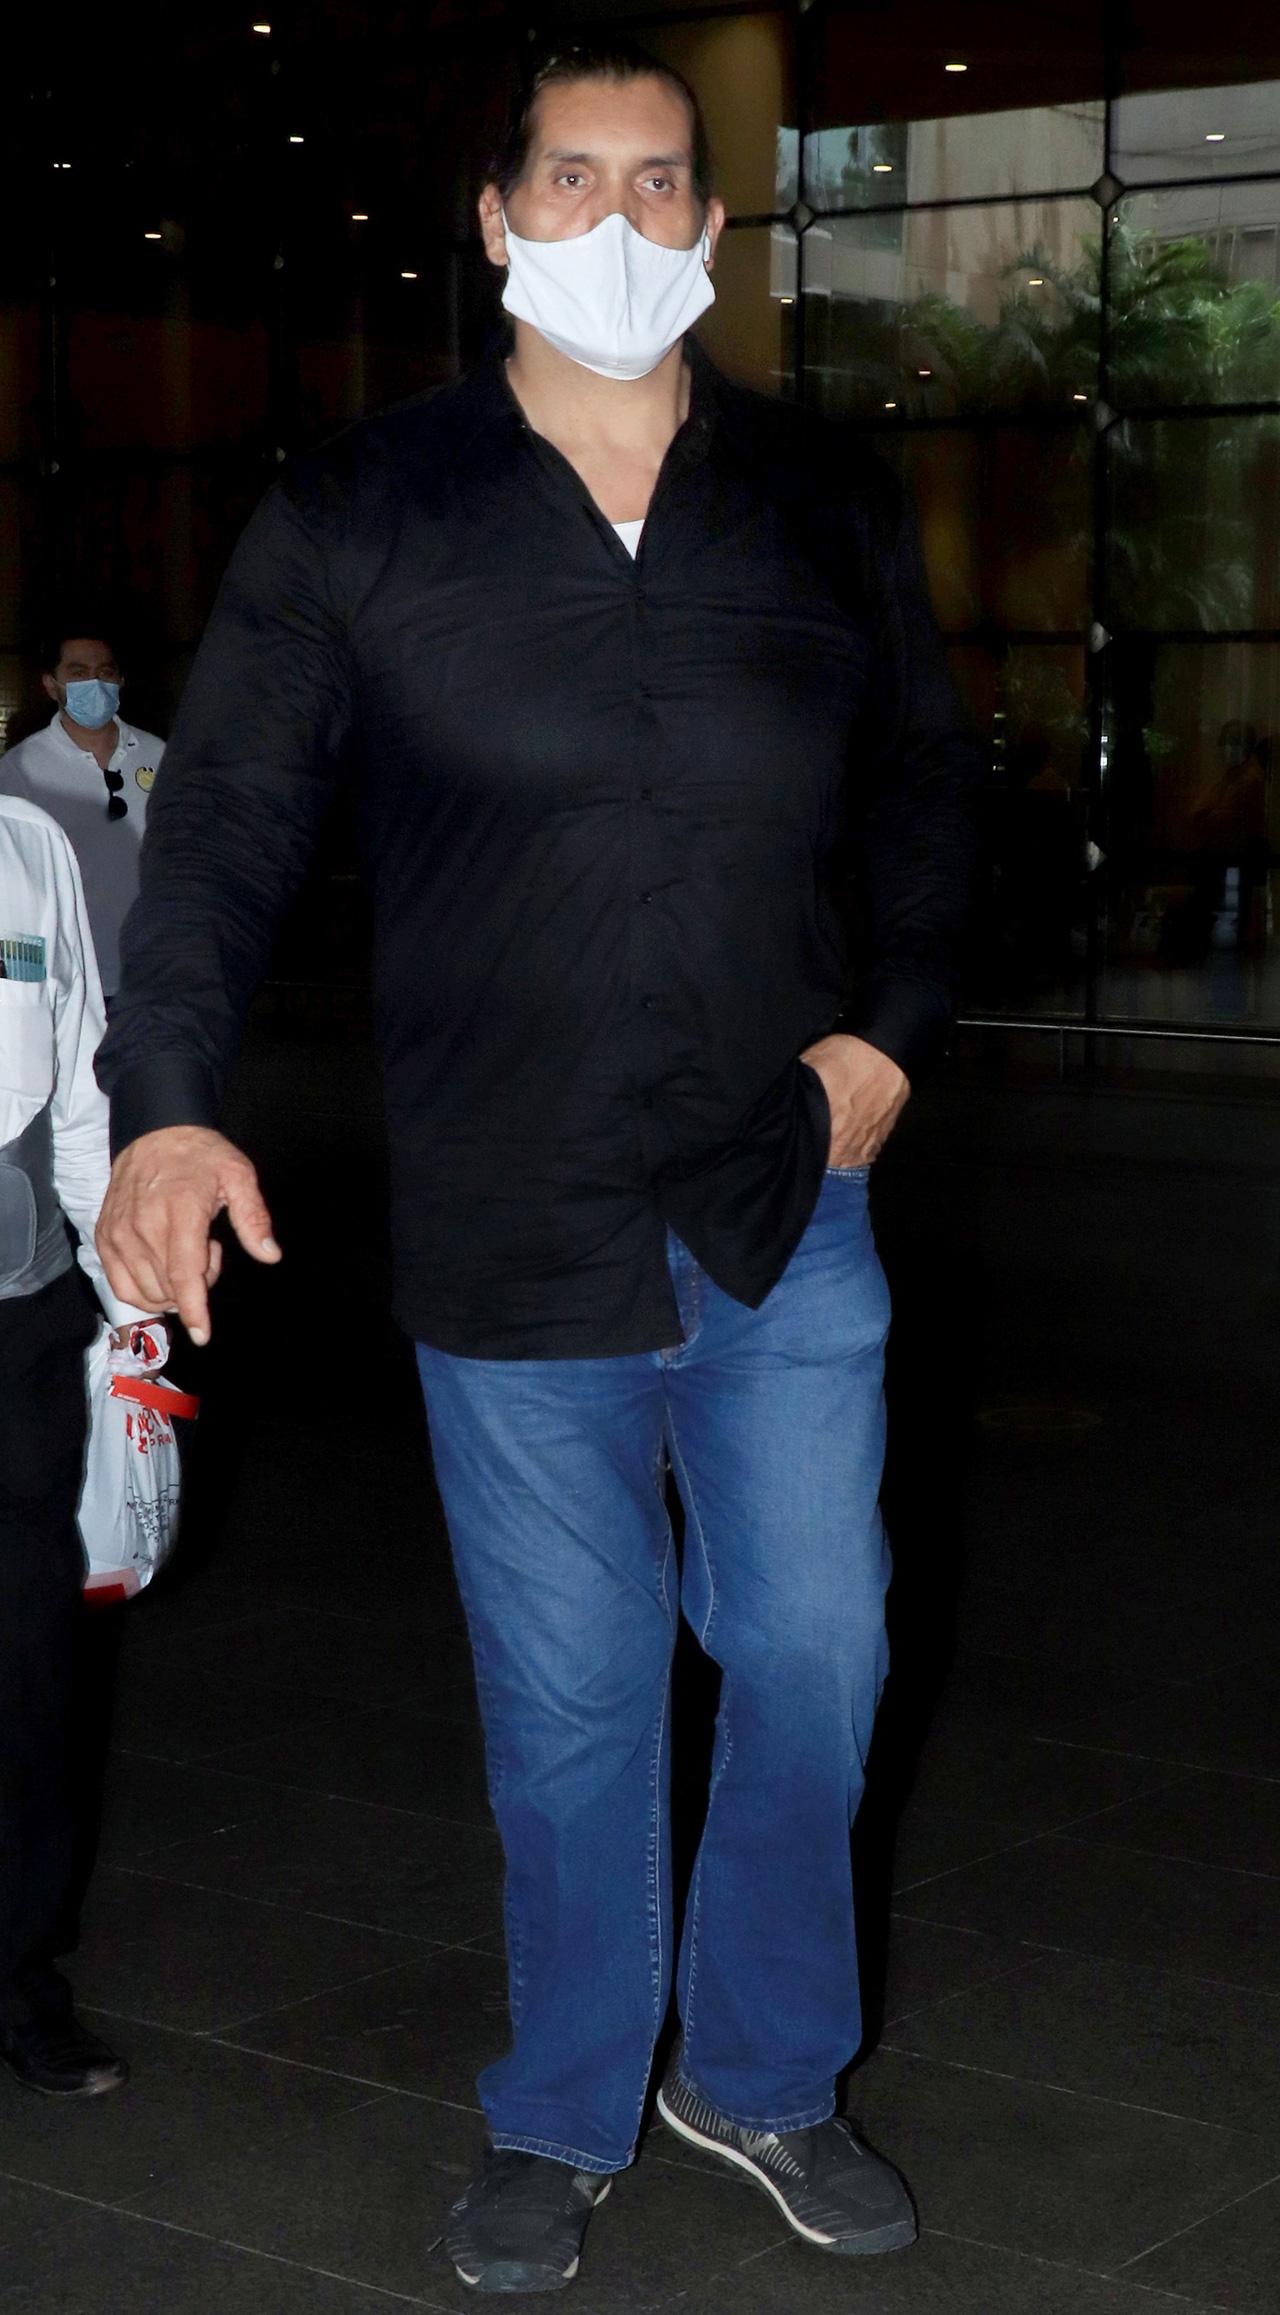 Actor and wrestler The Great Khali was also spotted at the Mumbai airport.